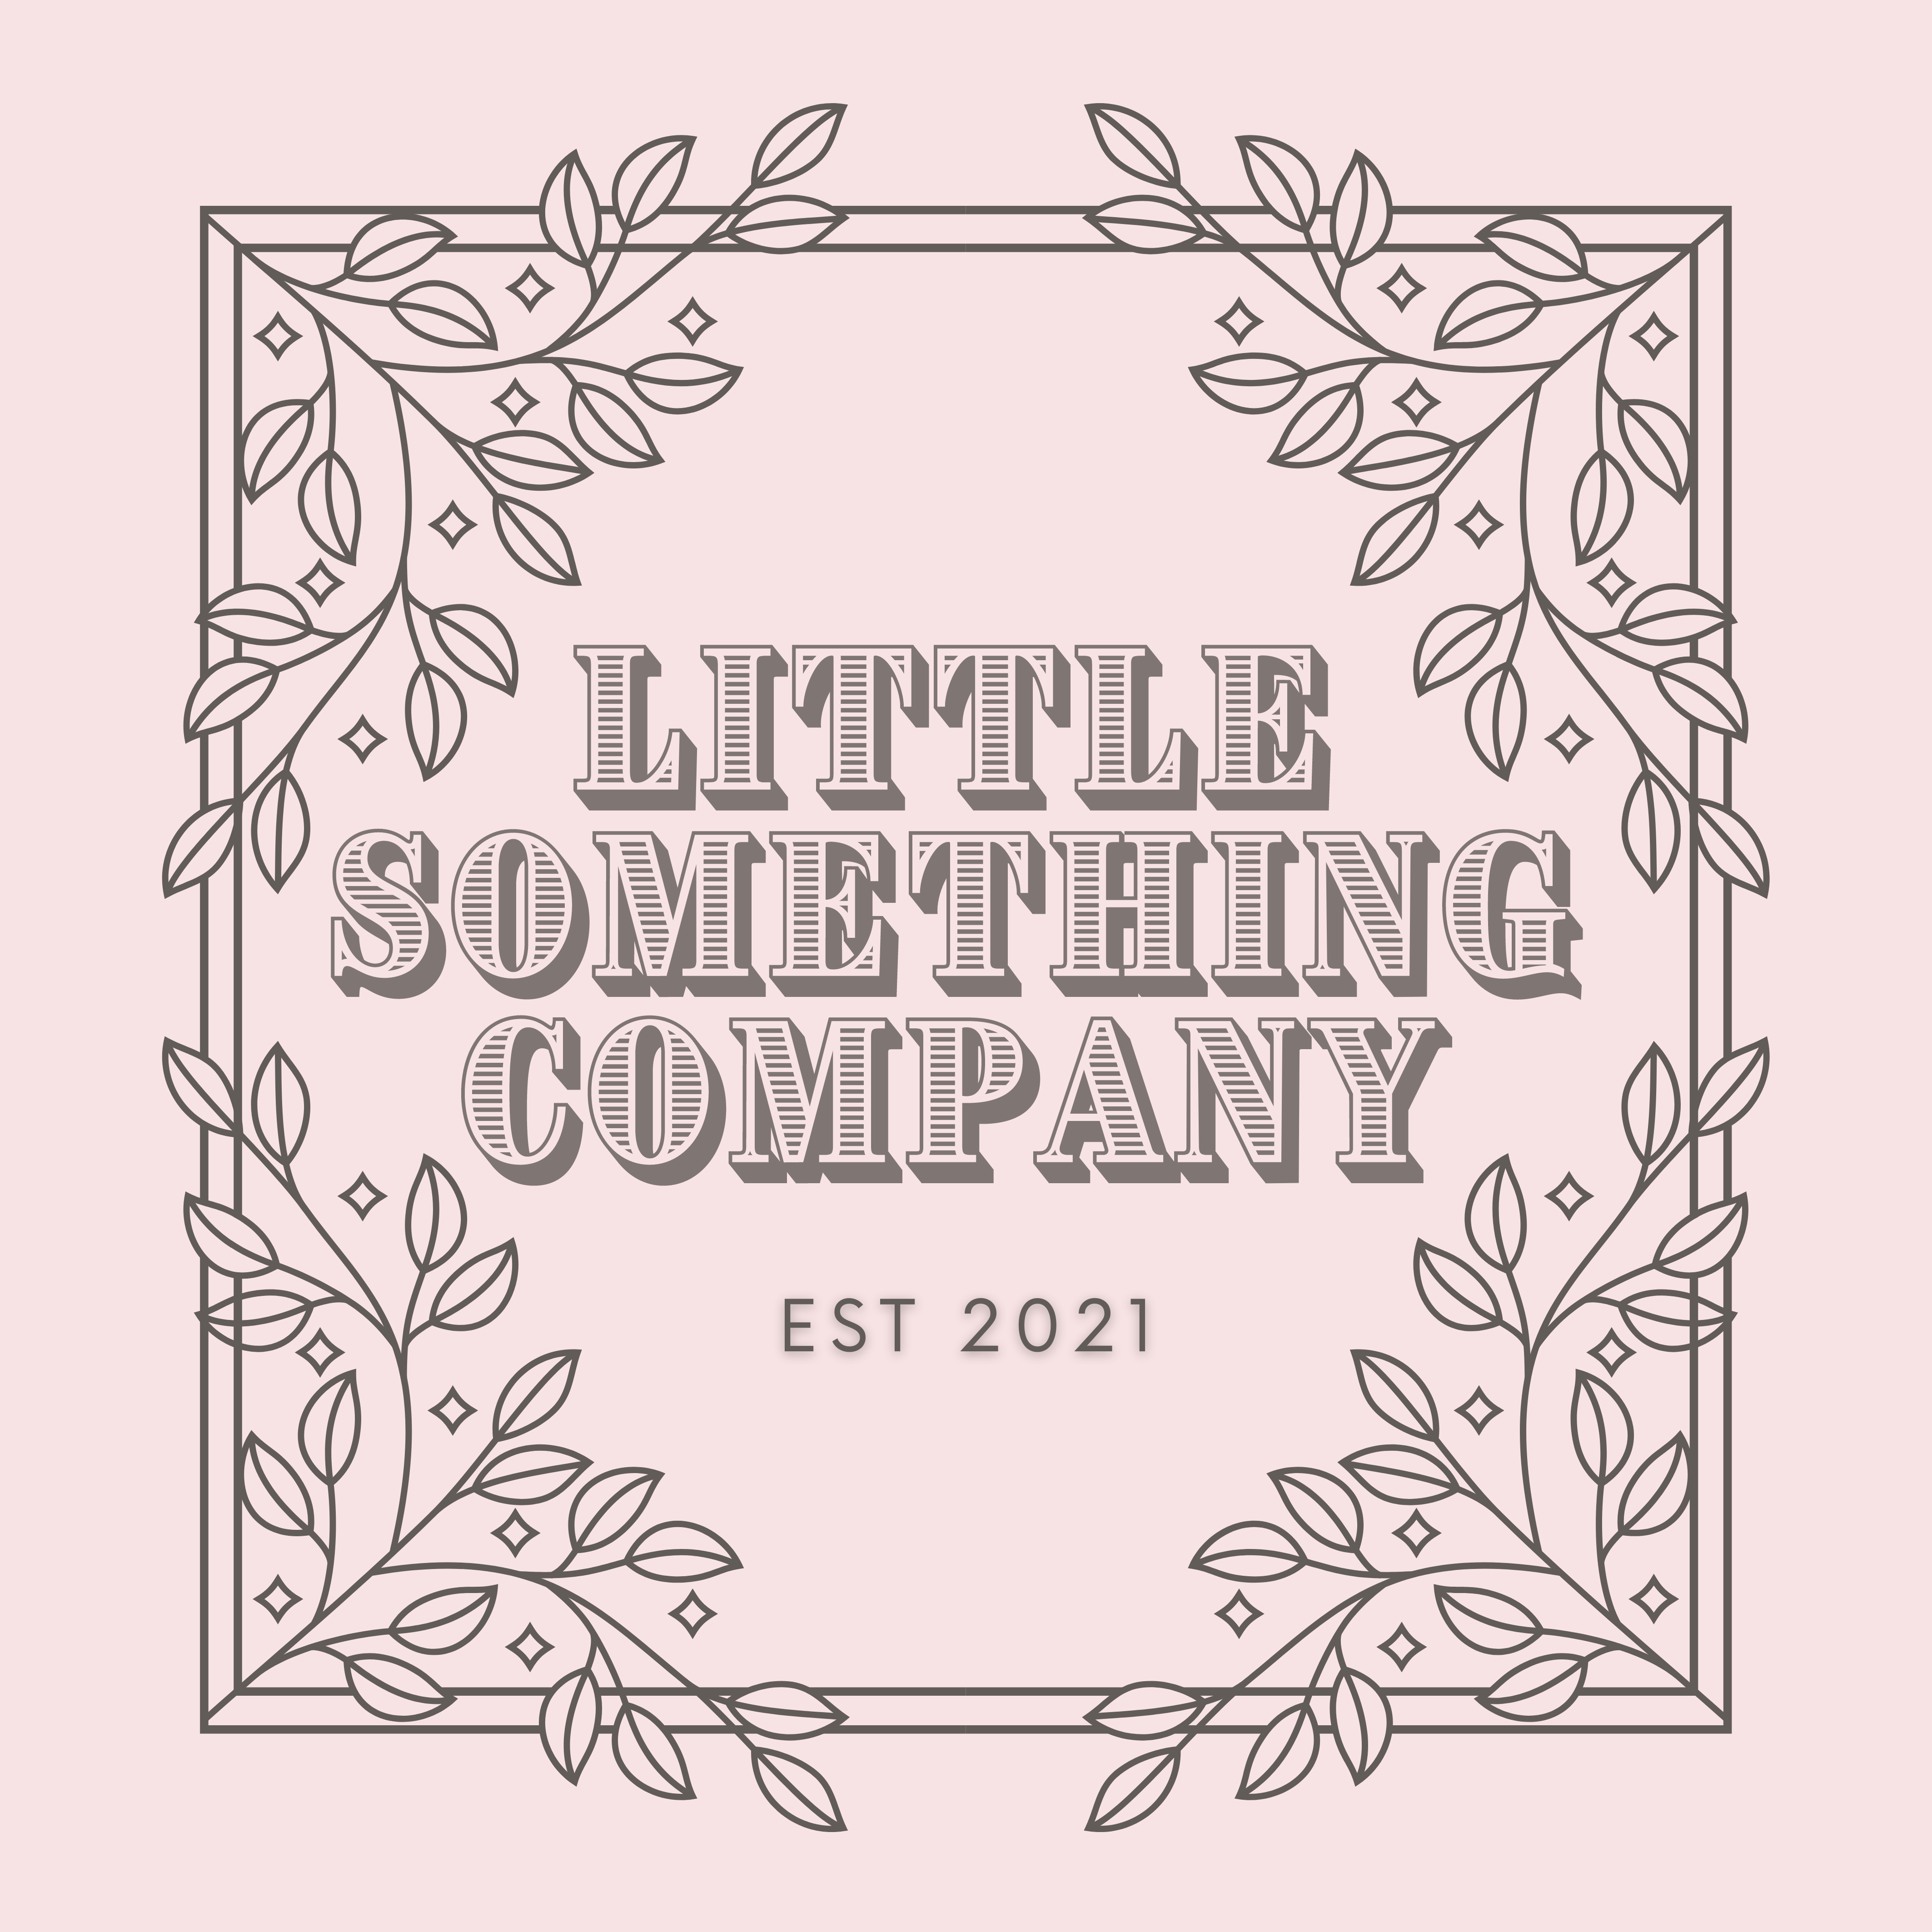 The Little Something Company